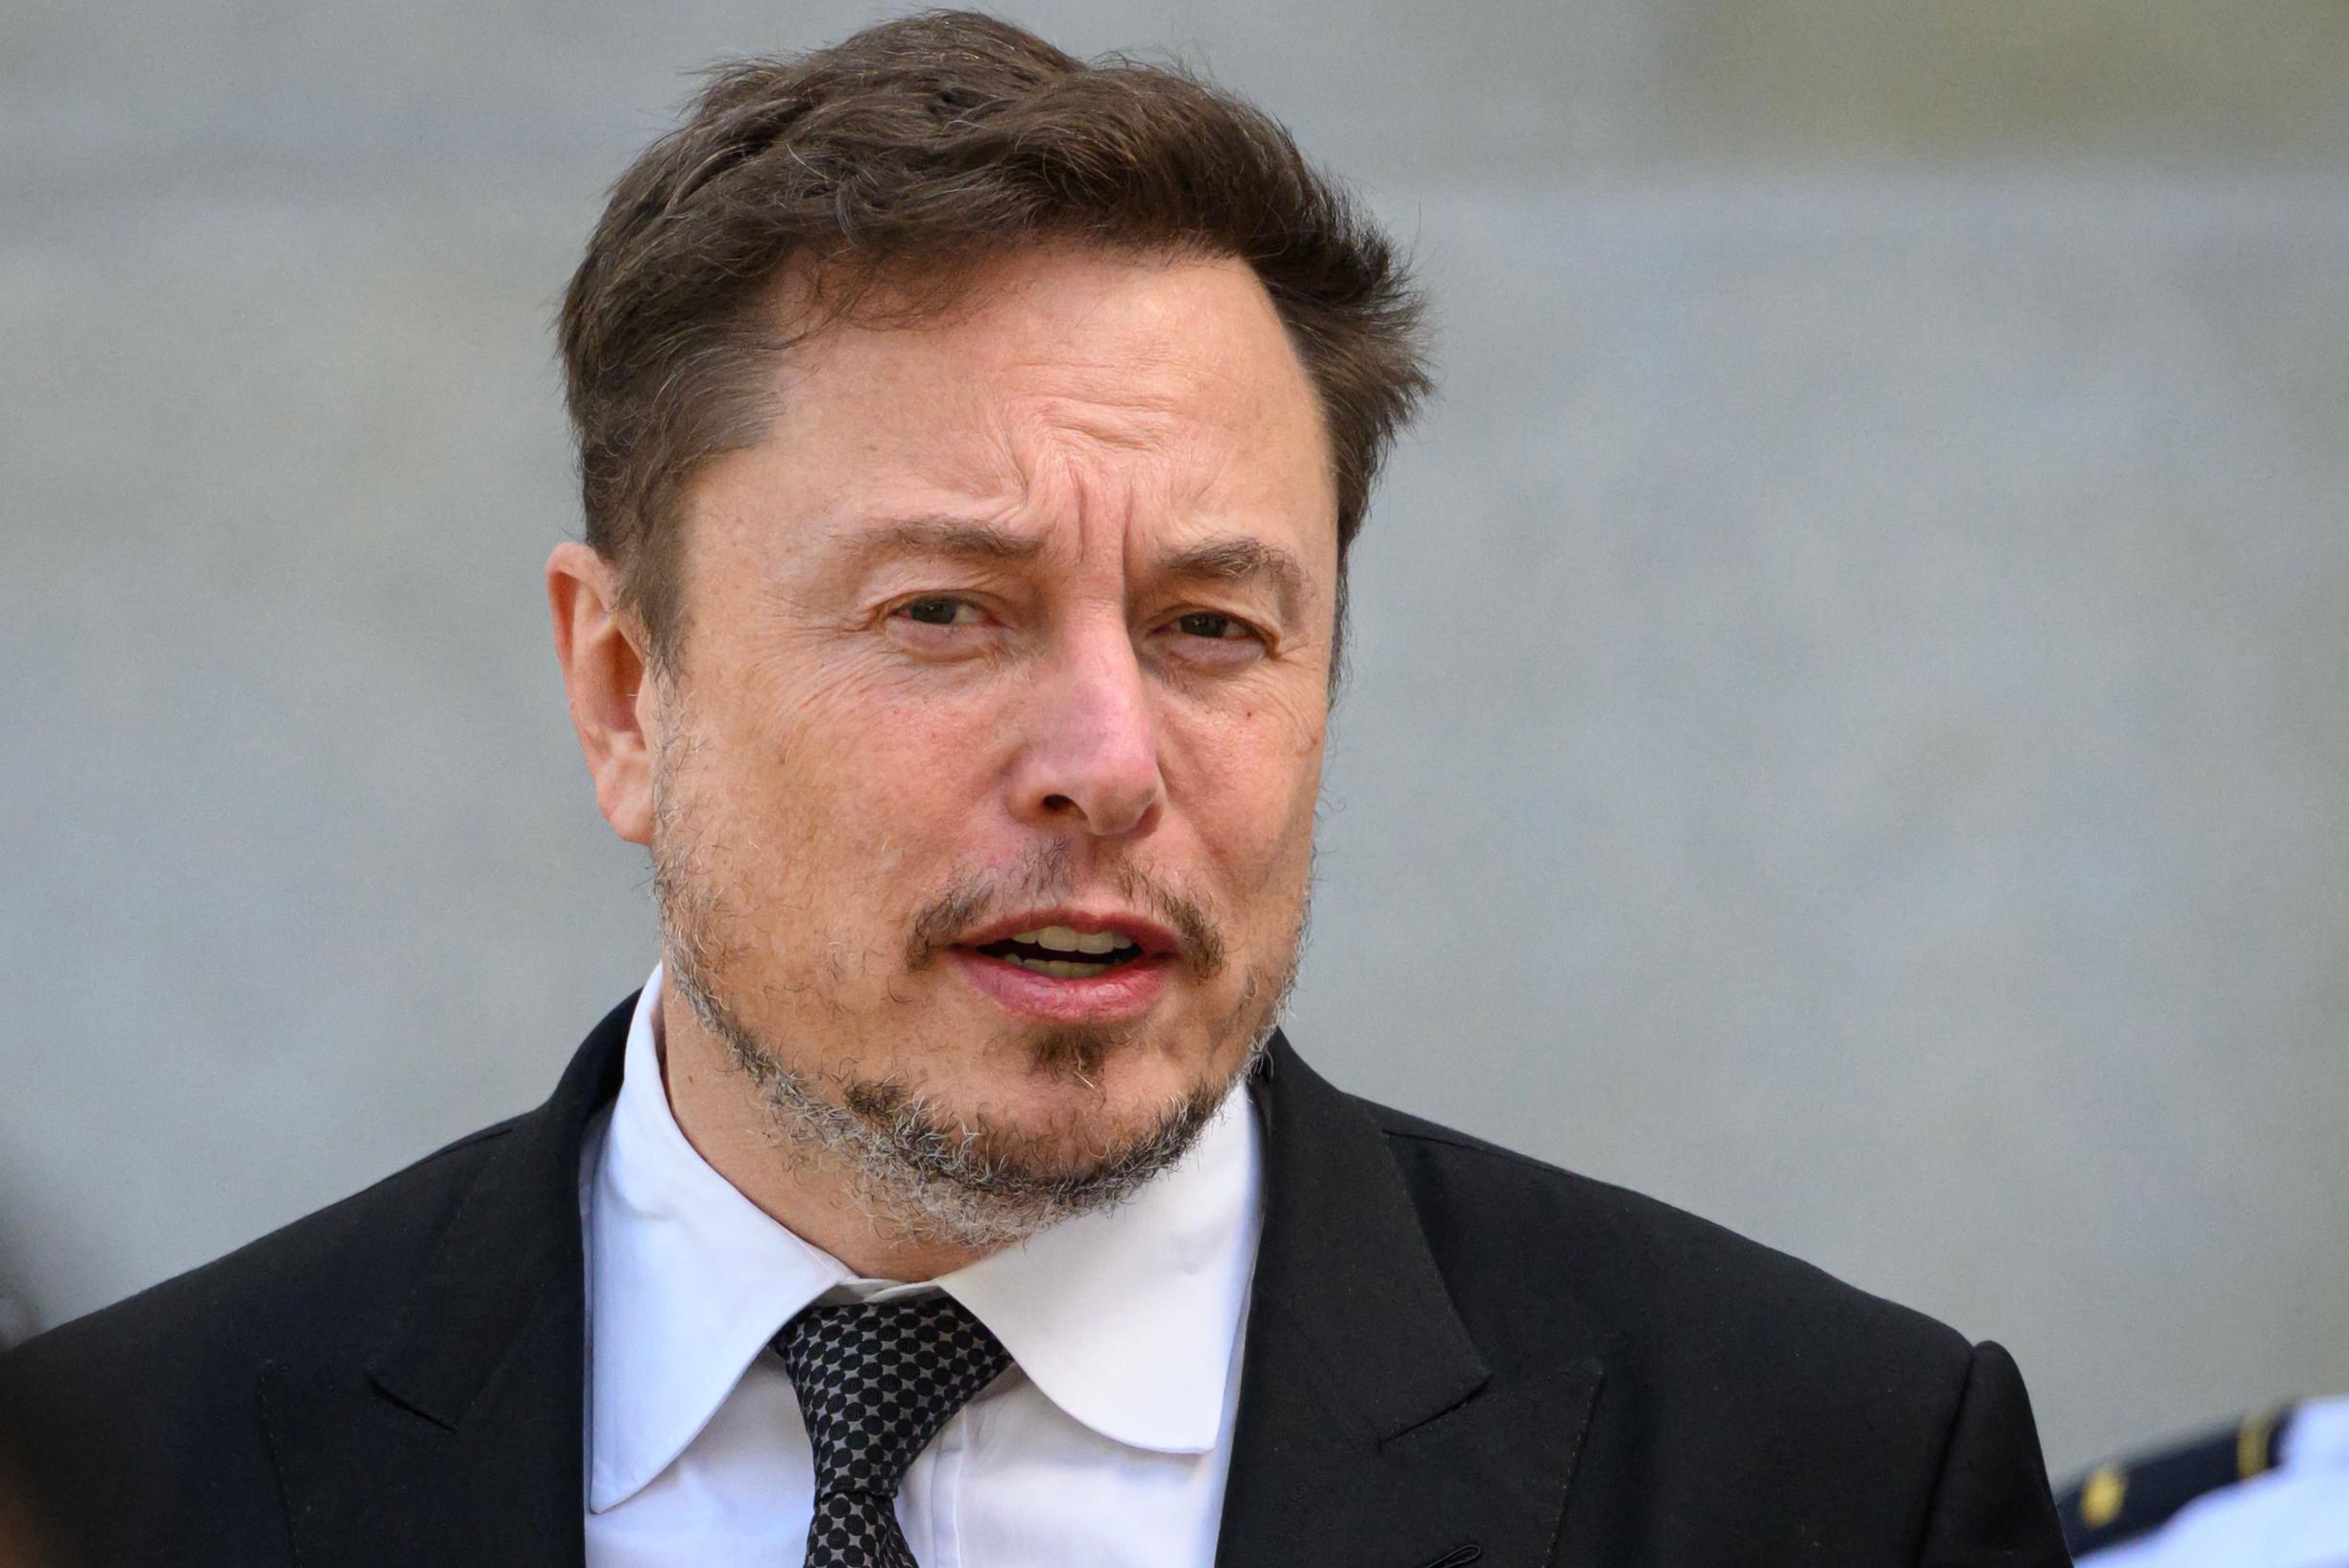 White House Slams Musk for Spreading Anti-Semitic and Fascist Views